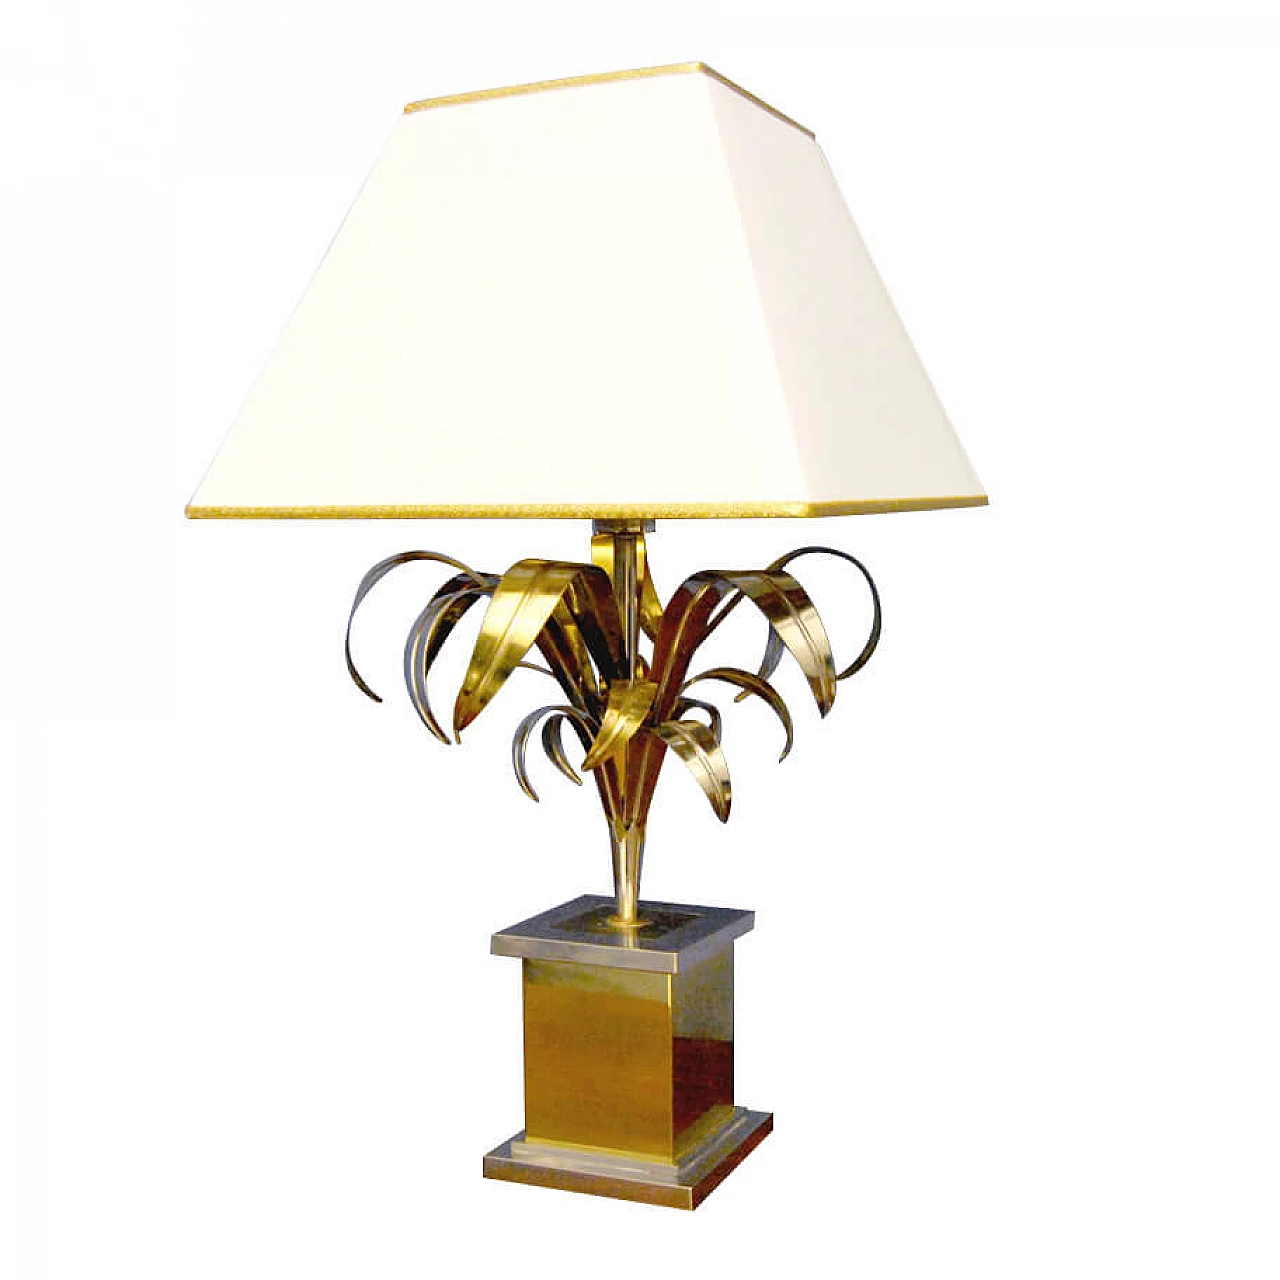 Brass table lamp attributed to Willy Rizzo, 1960s 1375392